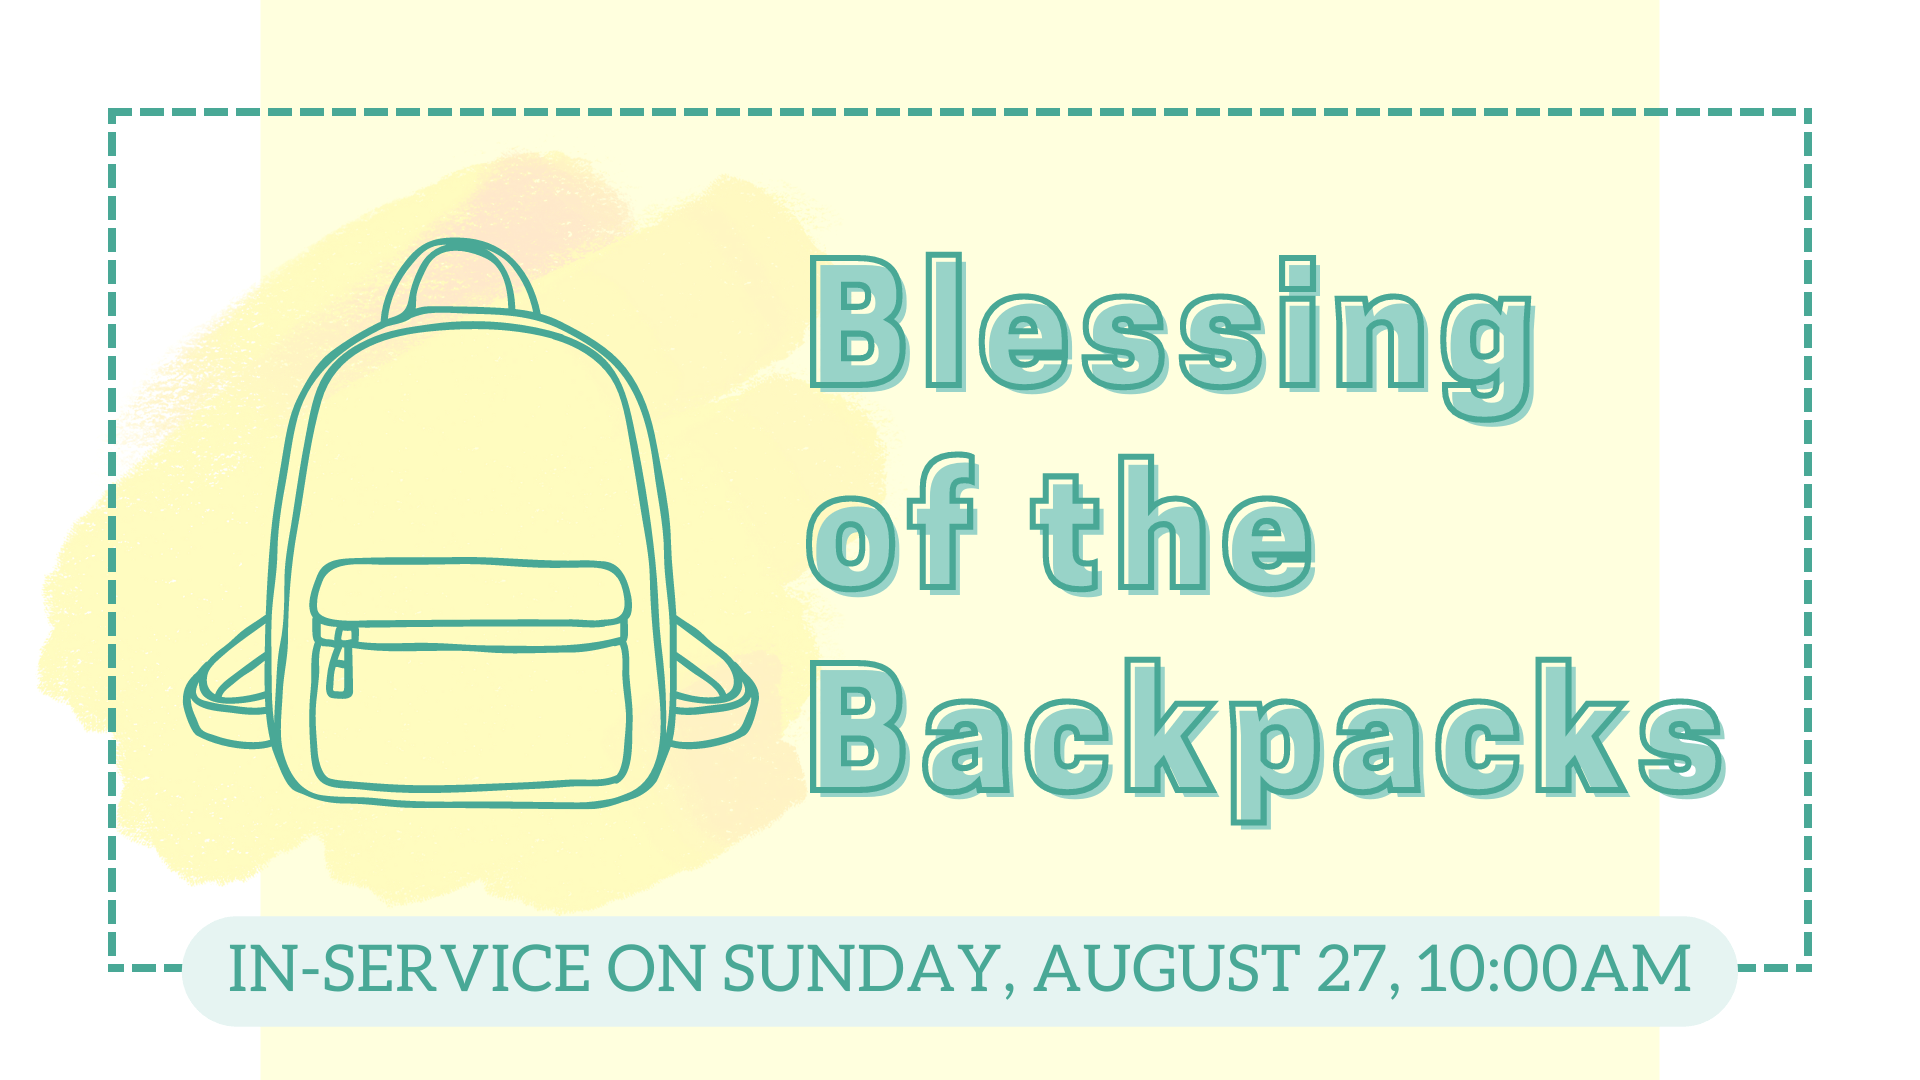 Graphic that has an outline of a blue backpack on it that says: "Blestting of the Backpacks. In-service on Sunday August 27, 10:00AM."